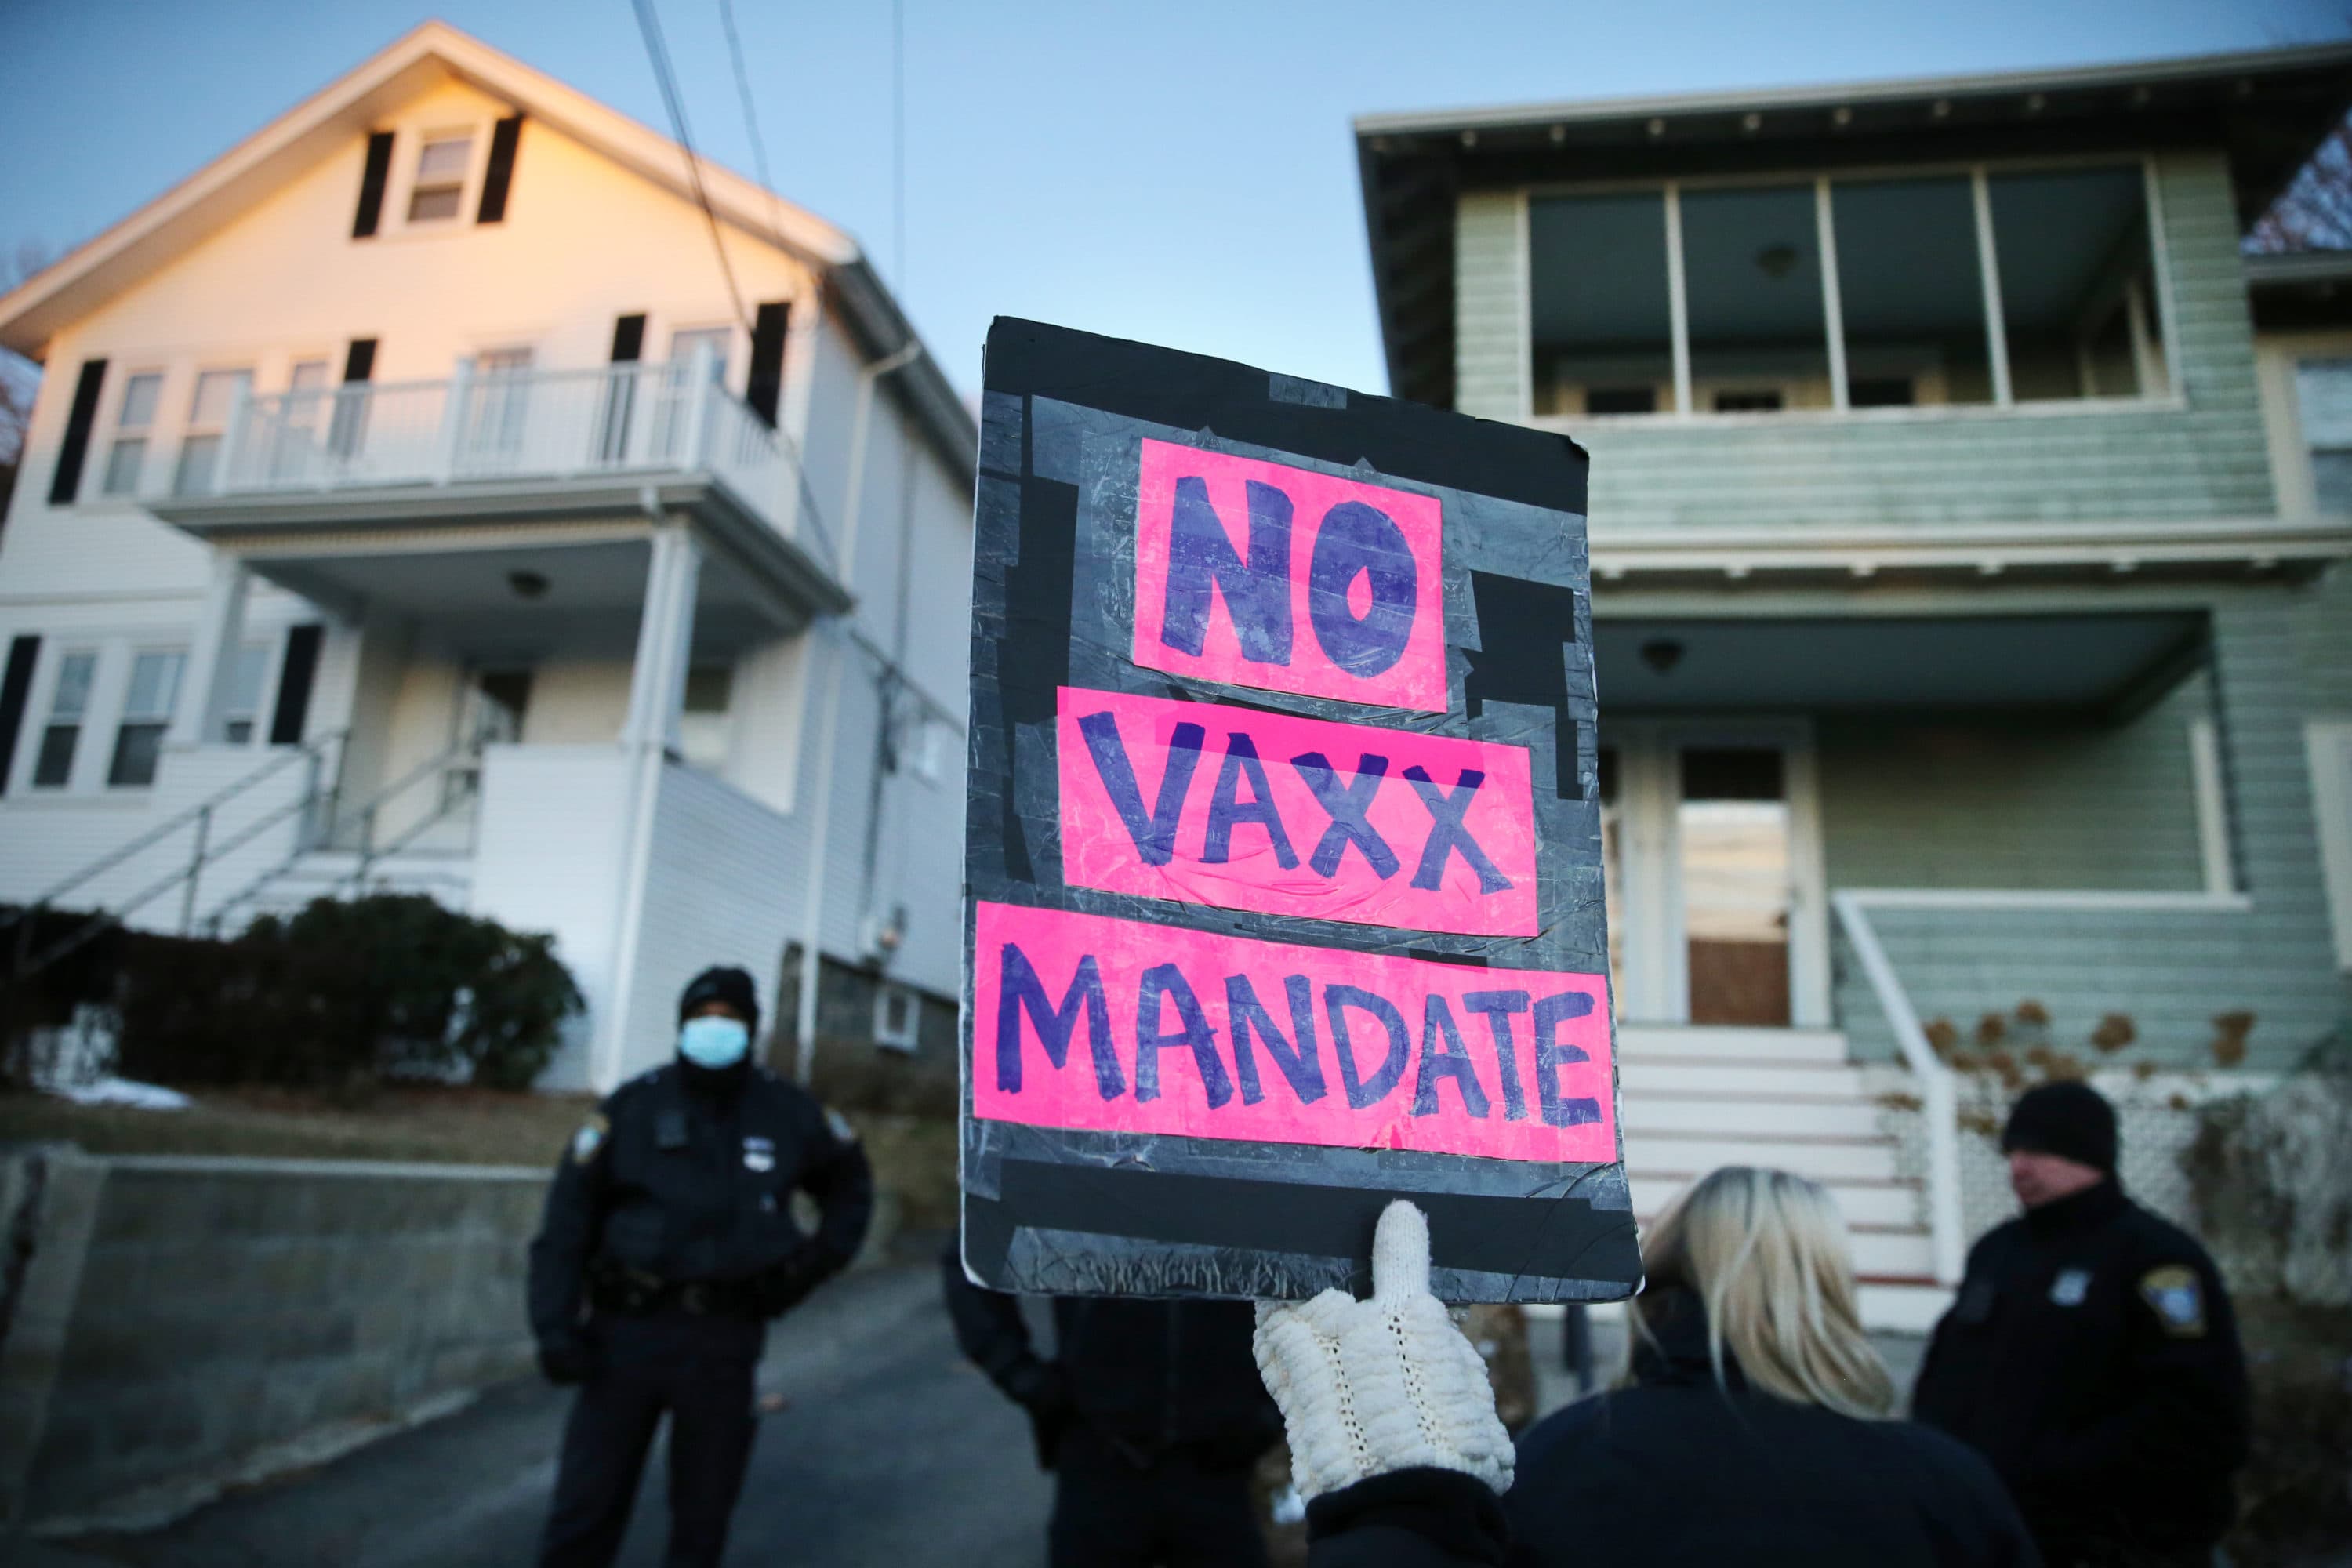 Demonstrators protest outside the home of Boston Mayor Michelle Wu in Roslindale on Jan. 25. The group was protesting the vaccine mandate in Boston. (Craig F. Walker/The Boston Globe via Getty Images)